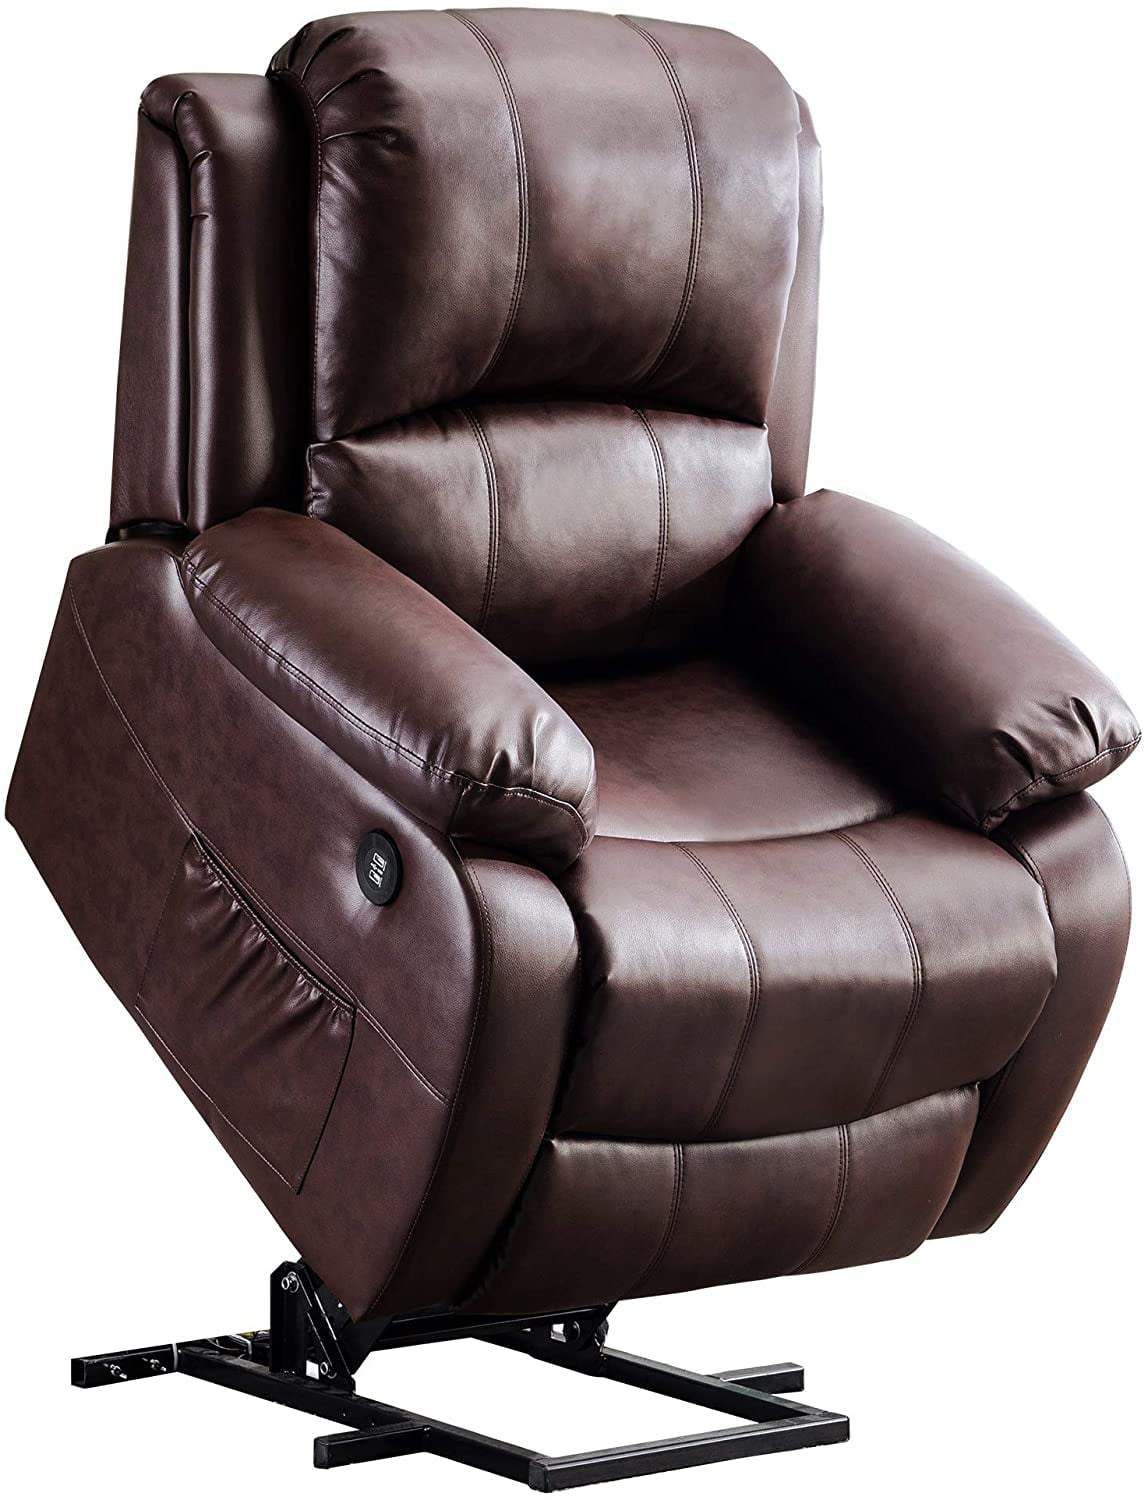 Mcombo Small Sized Electric Power Lift Recliner Chair Sofa With Massage And Heat For Small Elderly People Petite 3 Positions 2 Side Pockets Usb Ports Faux Leather 7409 Walmart Com Walmart Com